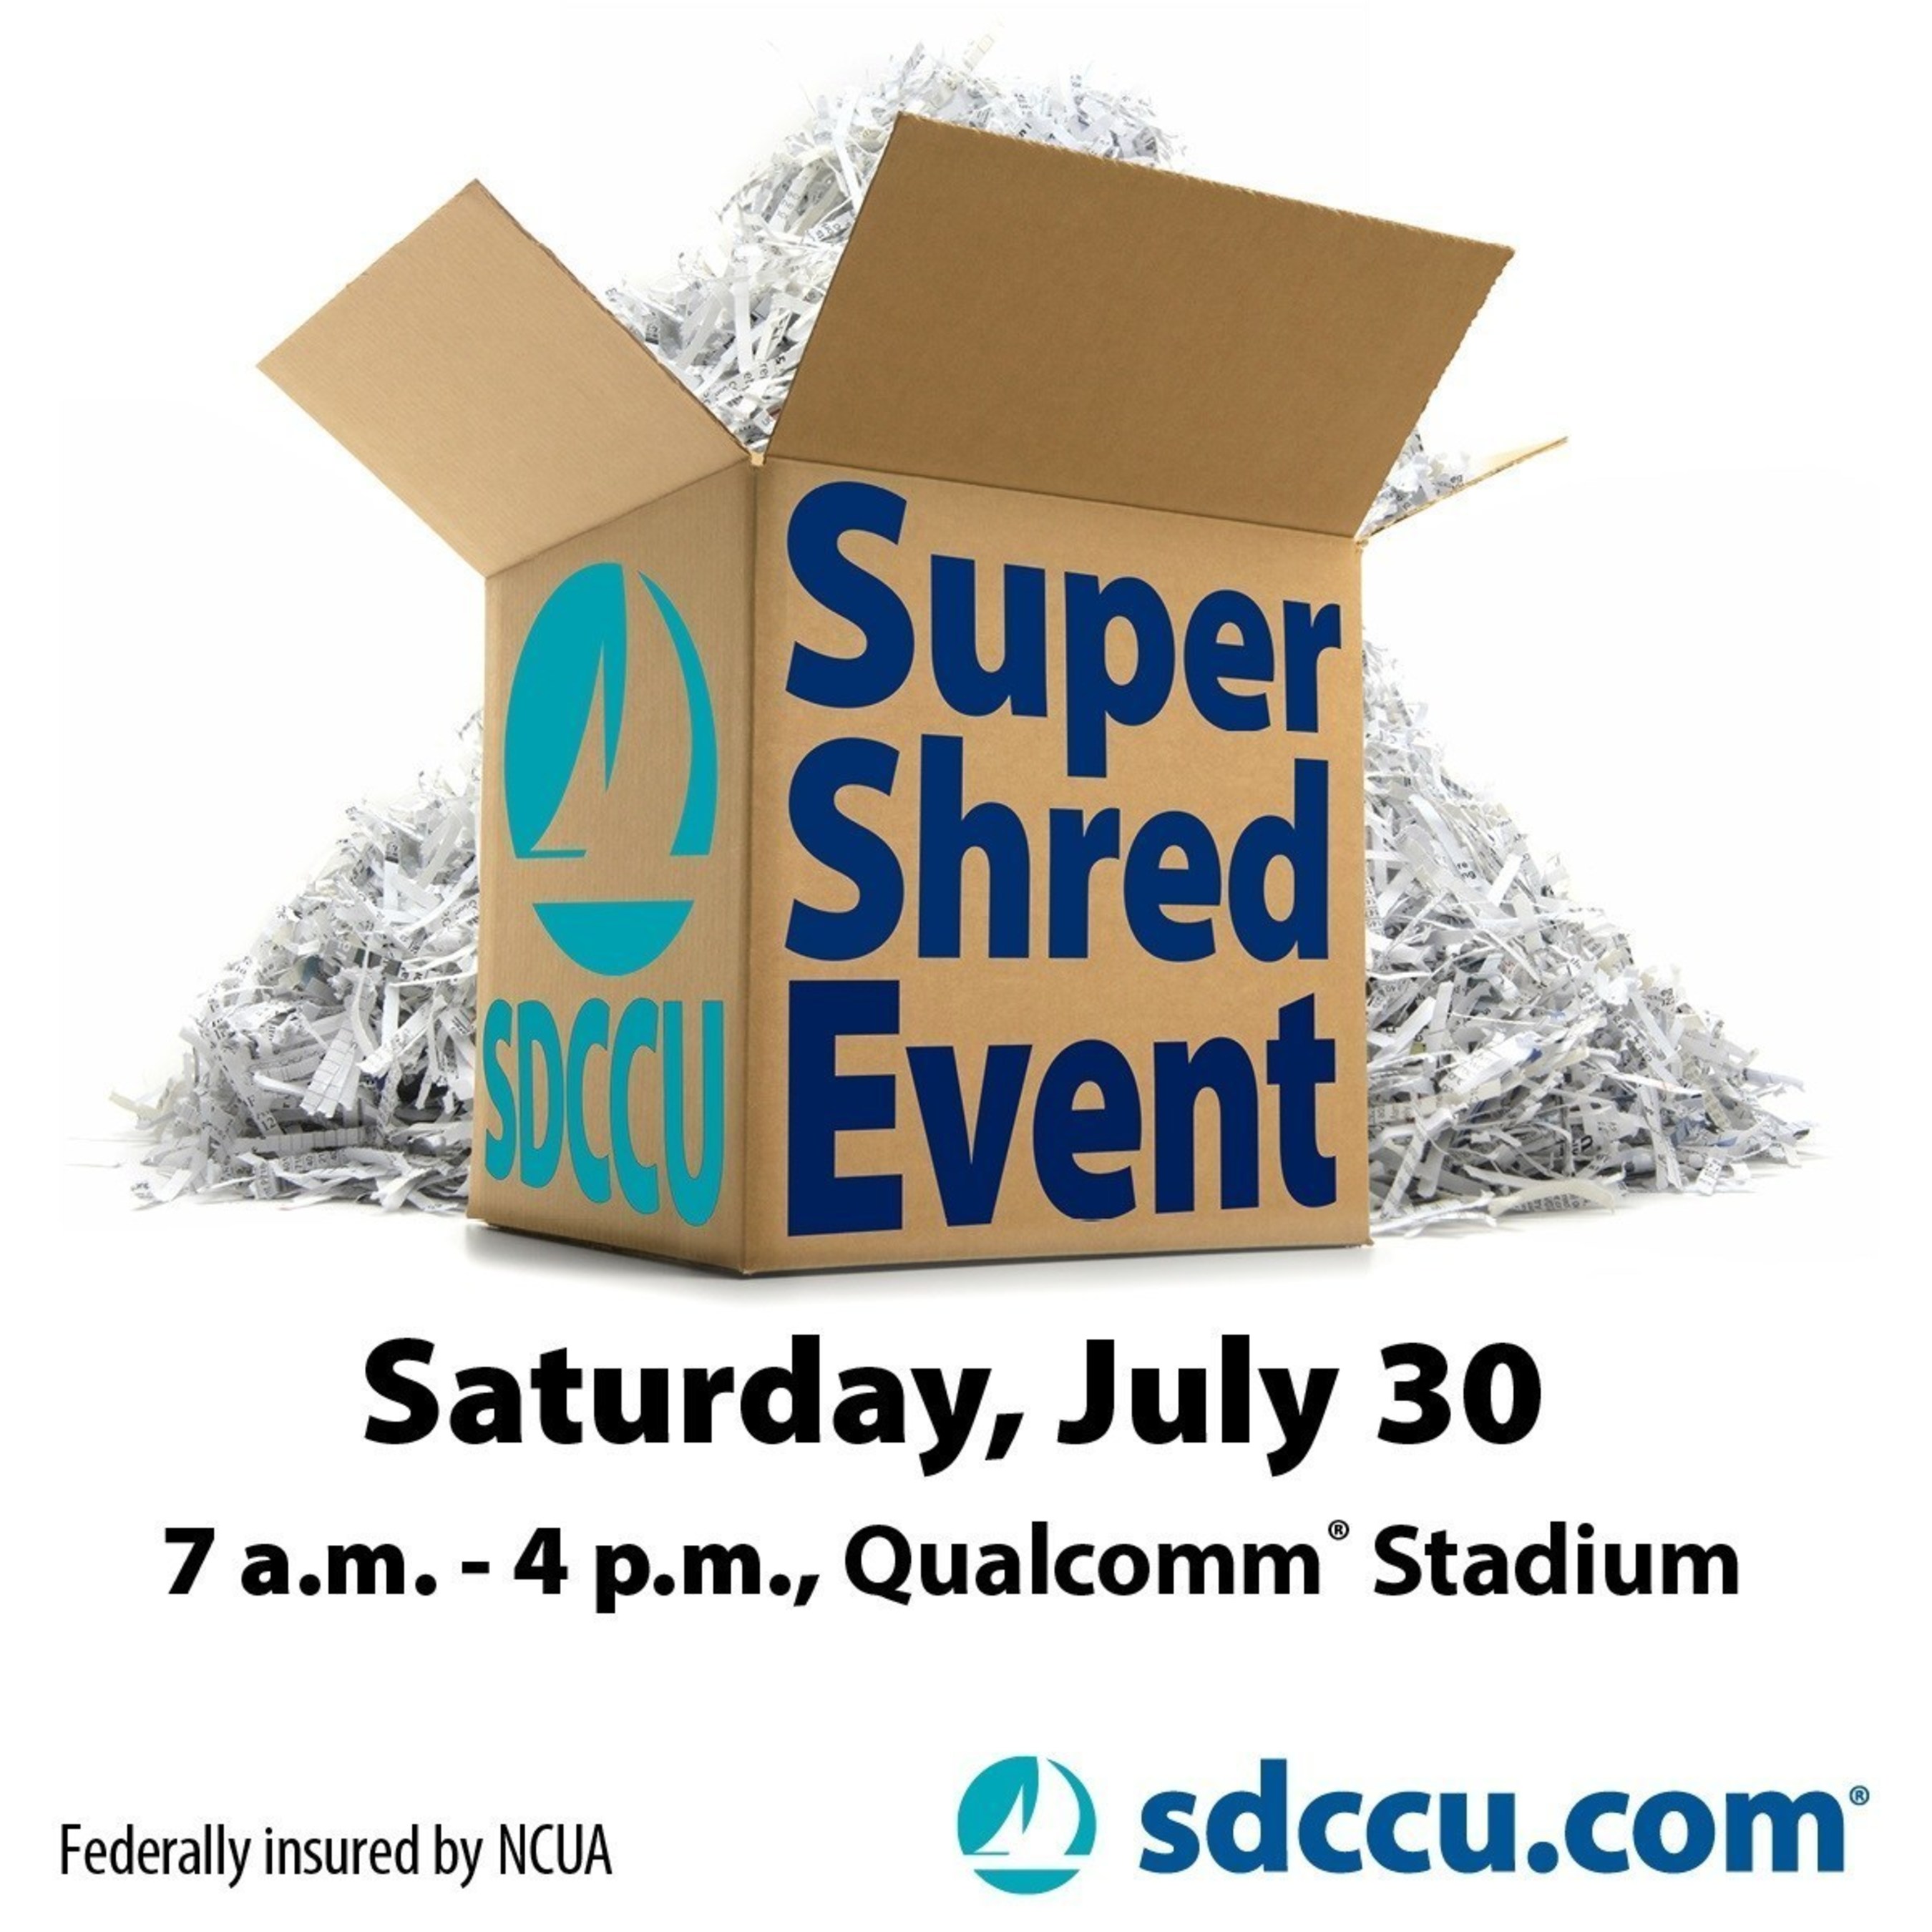 The SDCCU Super Shred Event is Saturday, July 30 from 7 a.m. to 4 p.m. at Qualcomm(R) Stadium. It's going to be the biggest in history - SDCCU is planning to shred the Guinness World Record(R) for most paper collected in 24 hours at a single location. The public is invited to bring all of their old documents containing personal and confidential information to be shred at no charge.